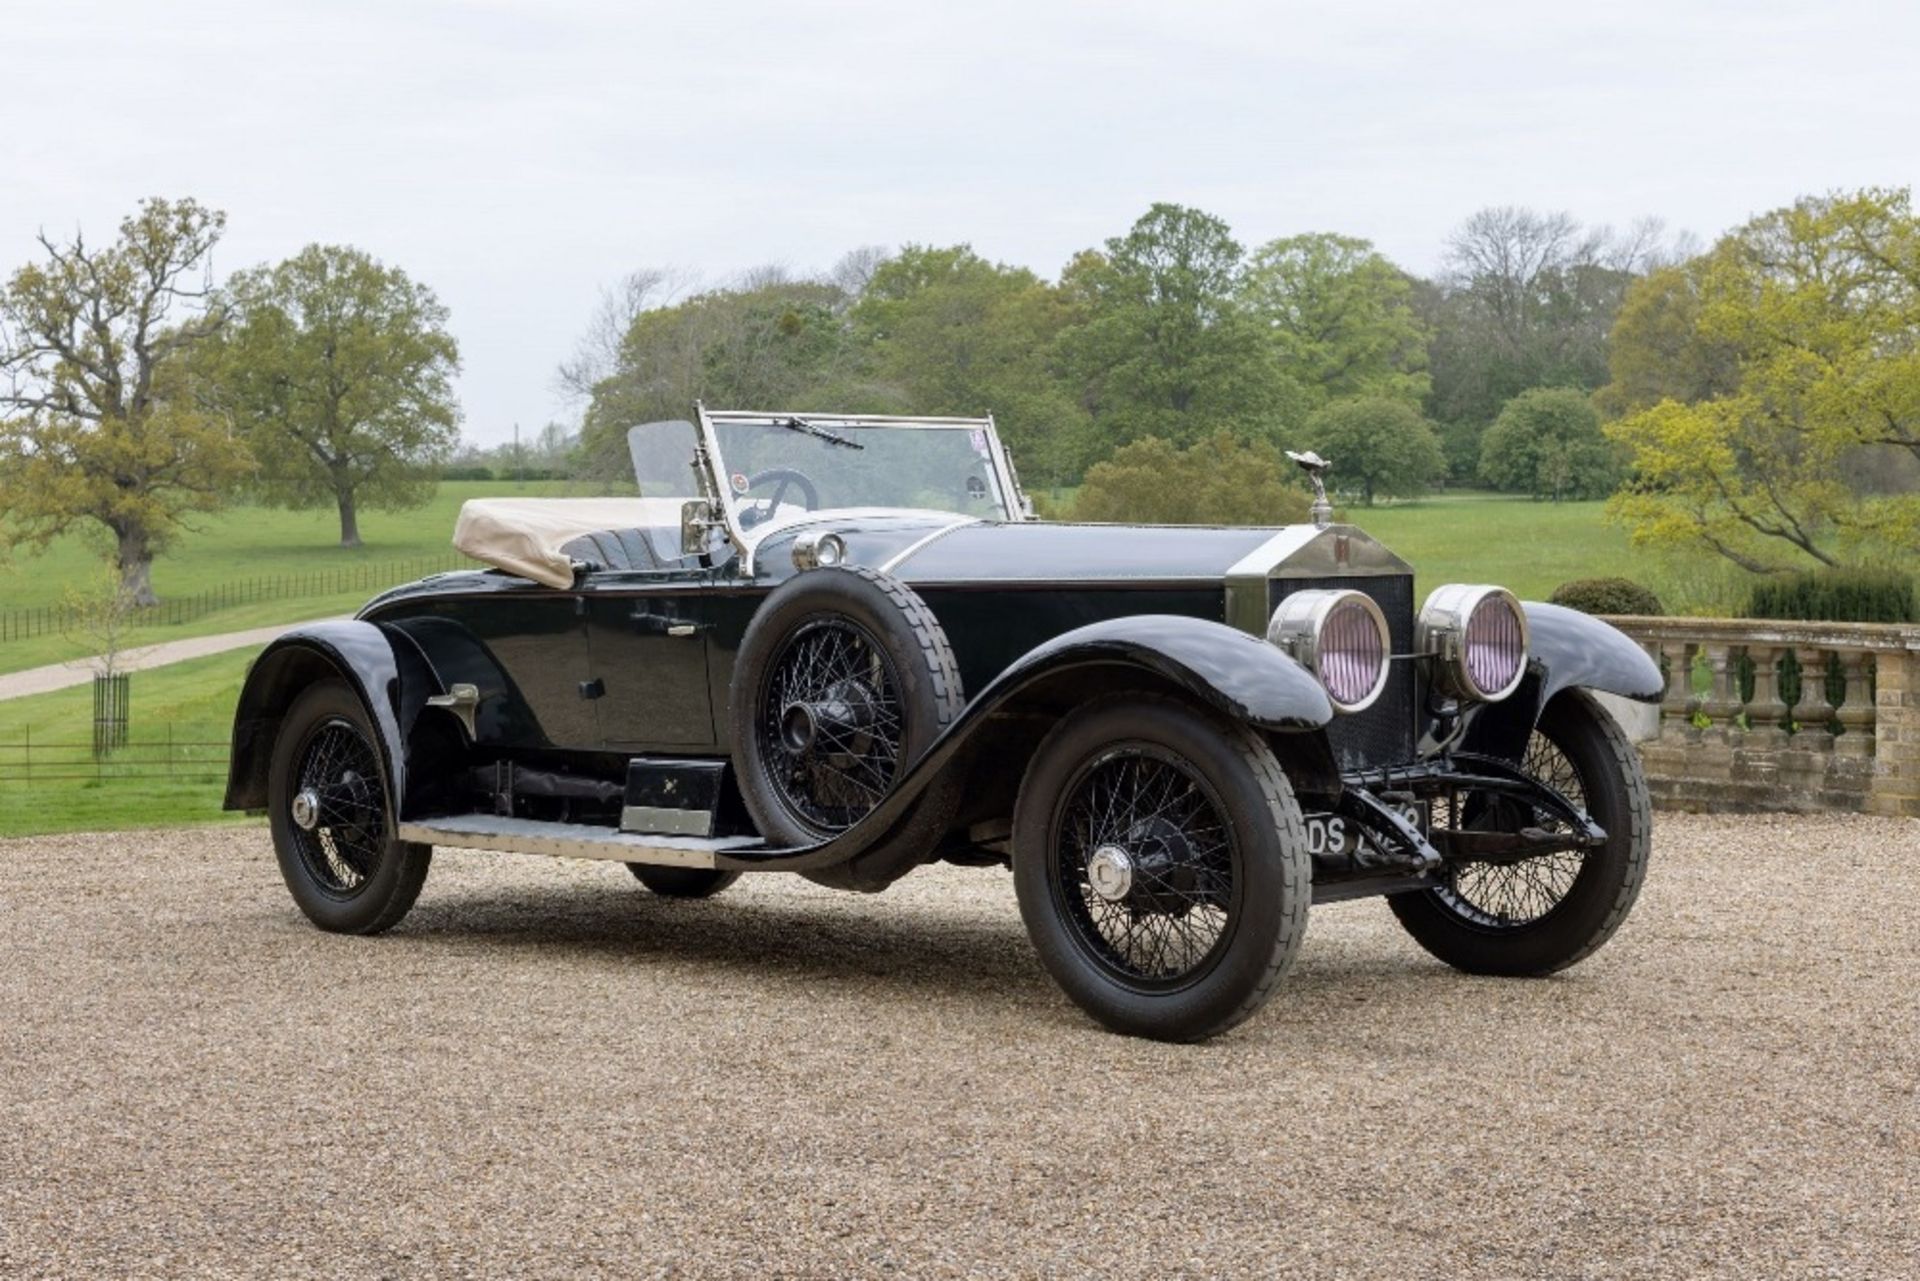 1923 ROLLS-ROYCE SILVER-GHOST PICCADILLY ROADSTER